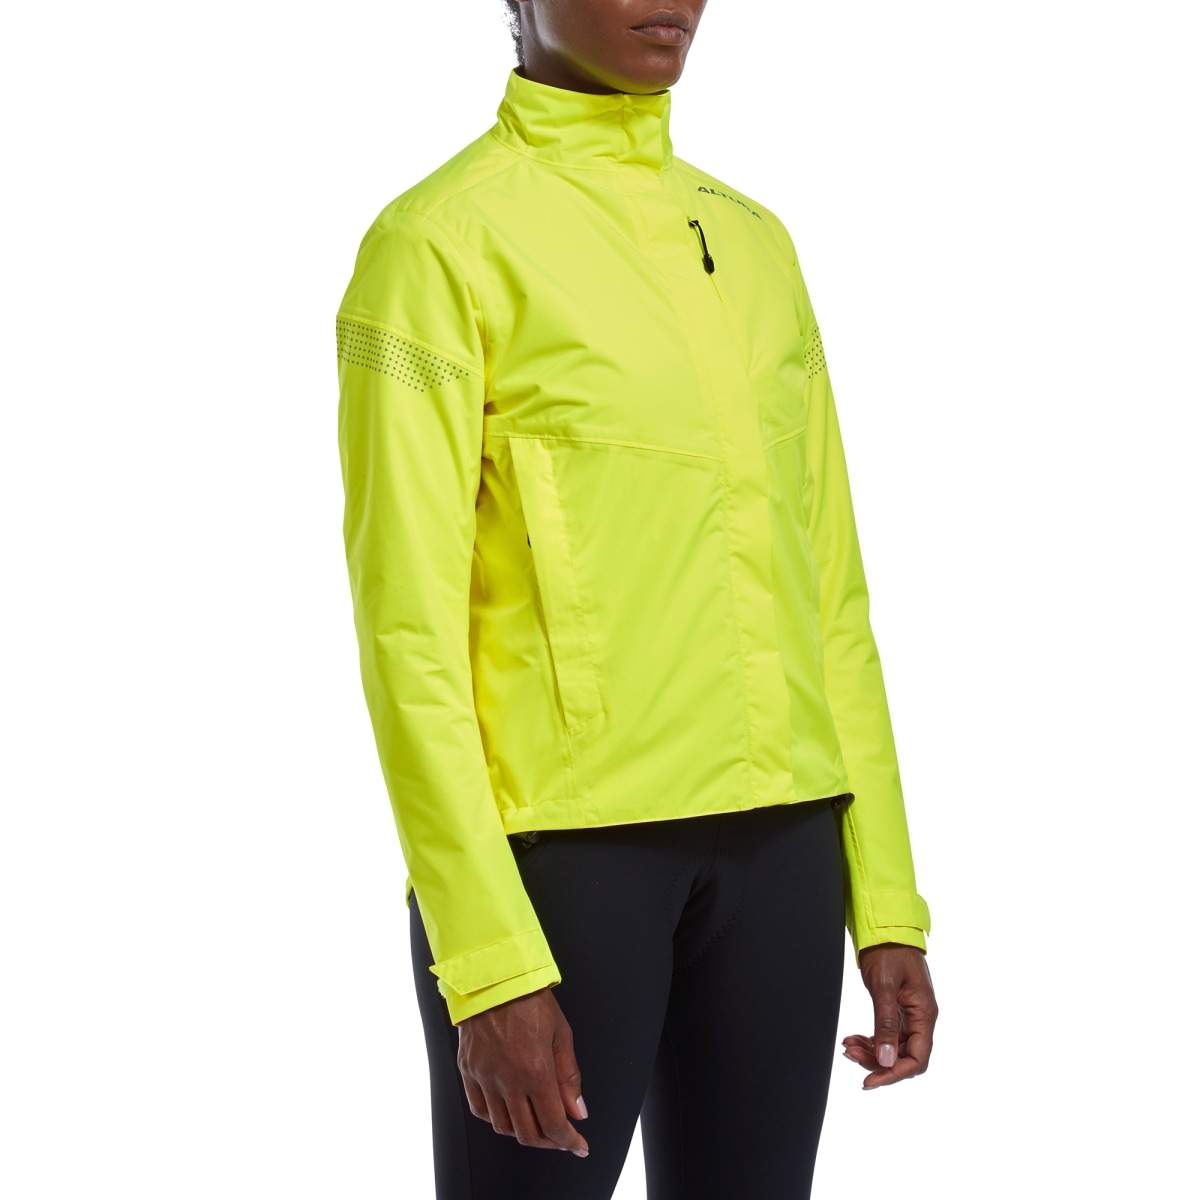 Cycles UK Altura  Nevis Nightvision Womens Jacket 12 YELLOW